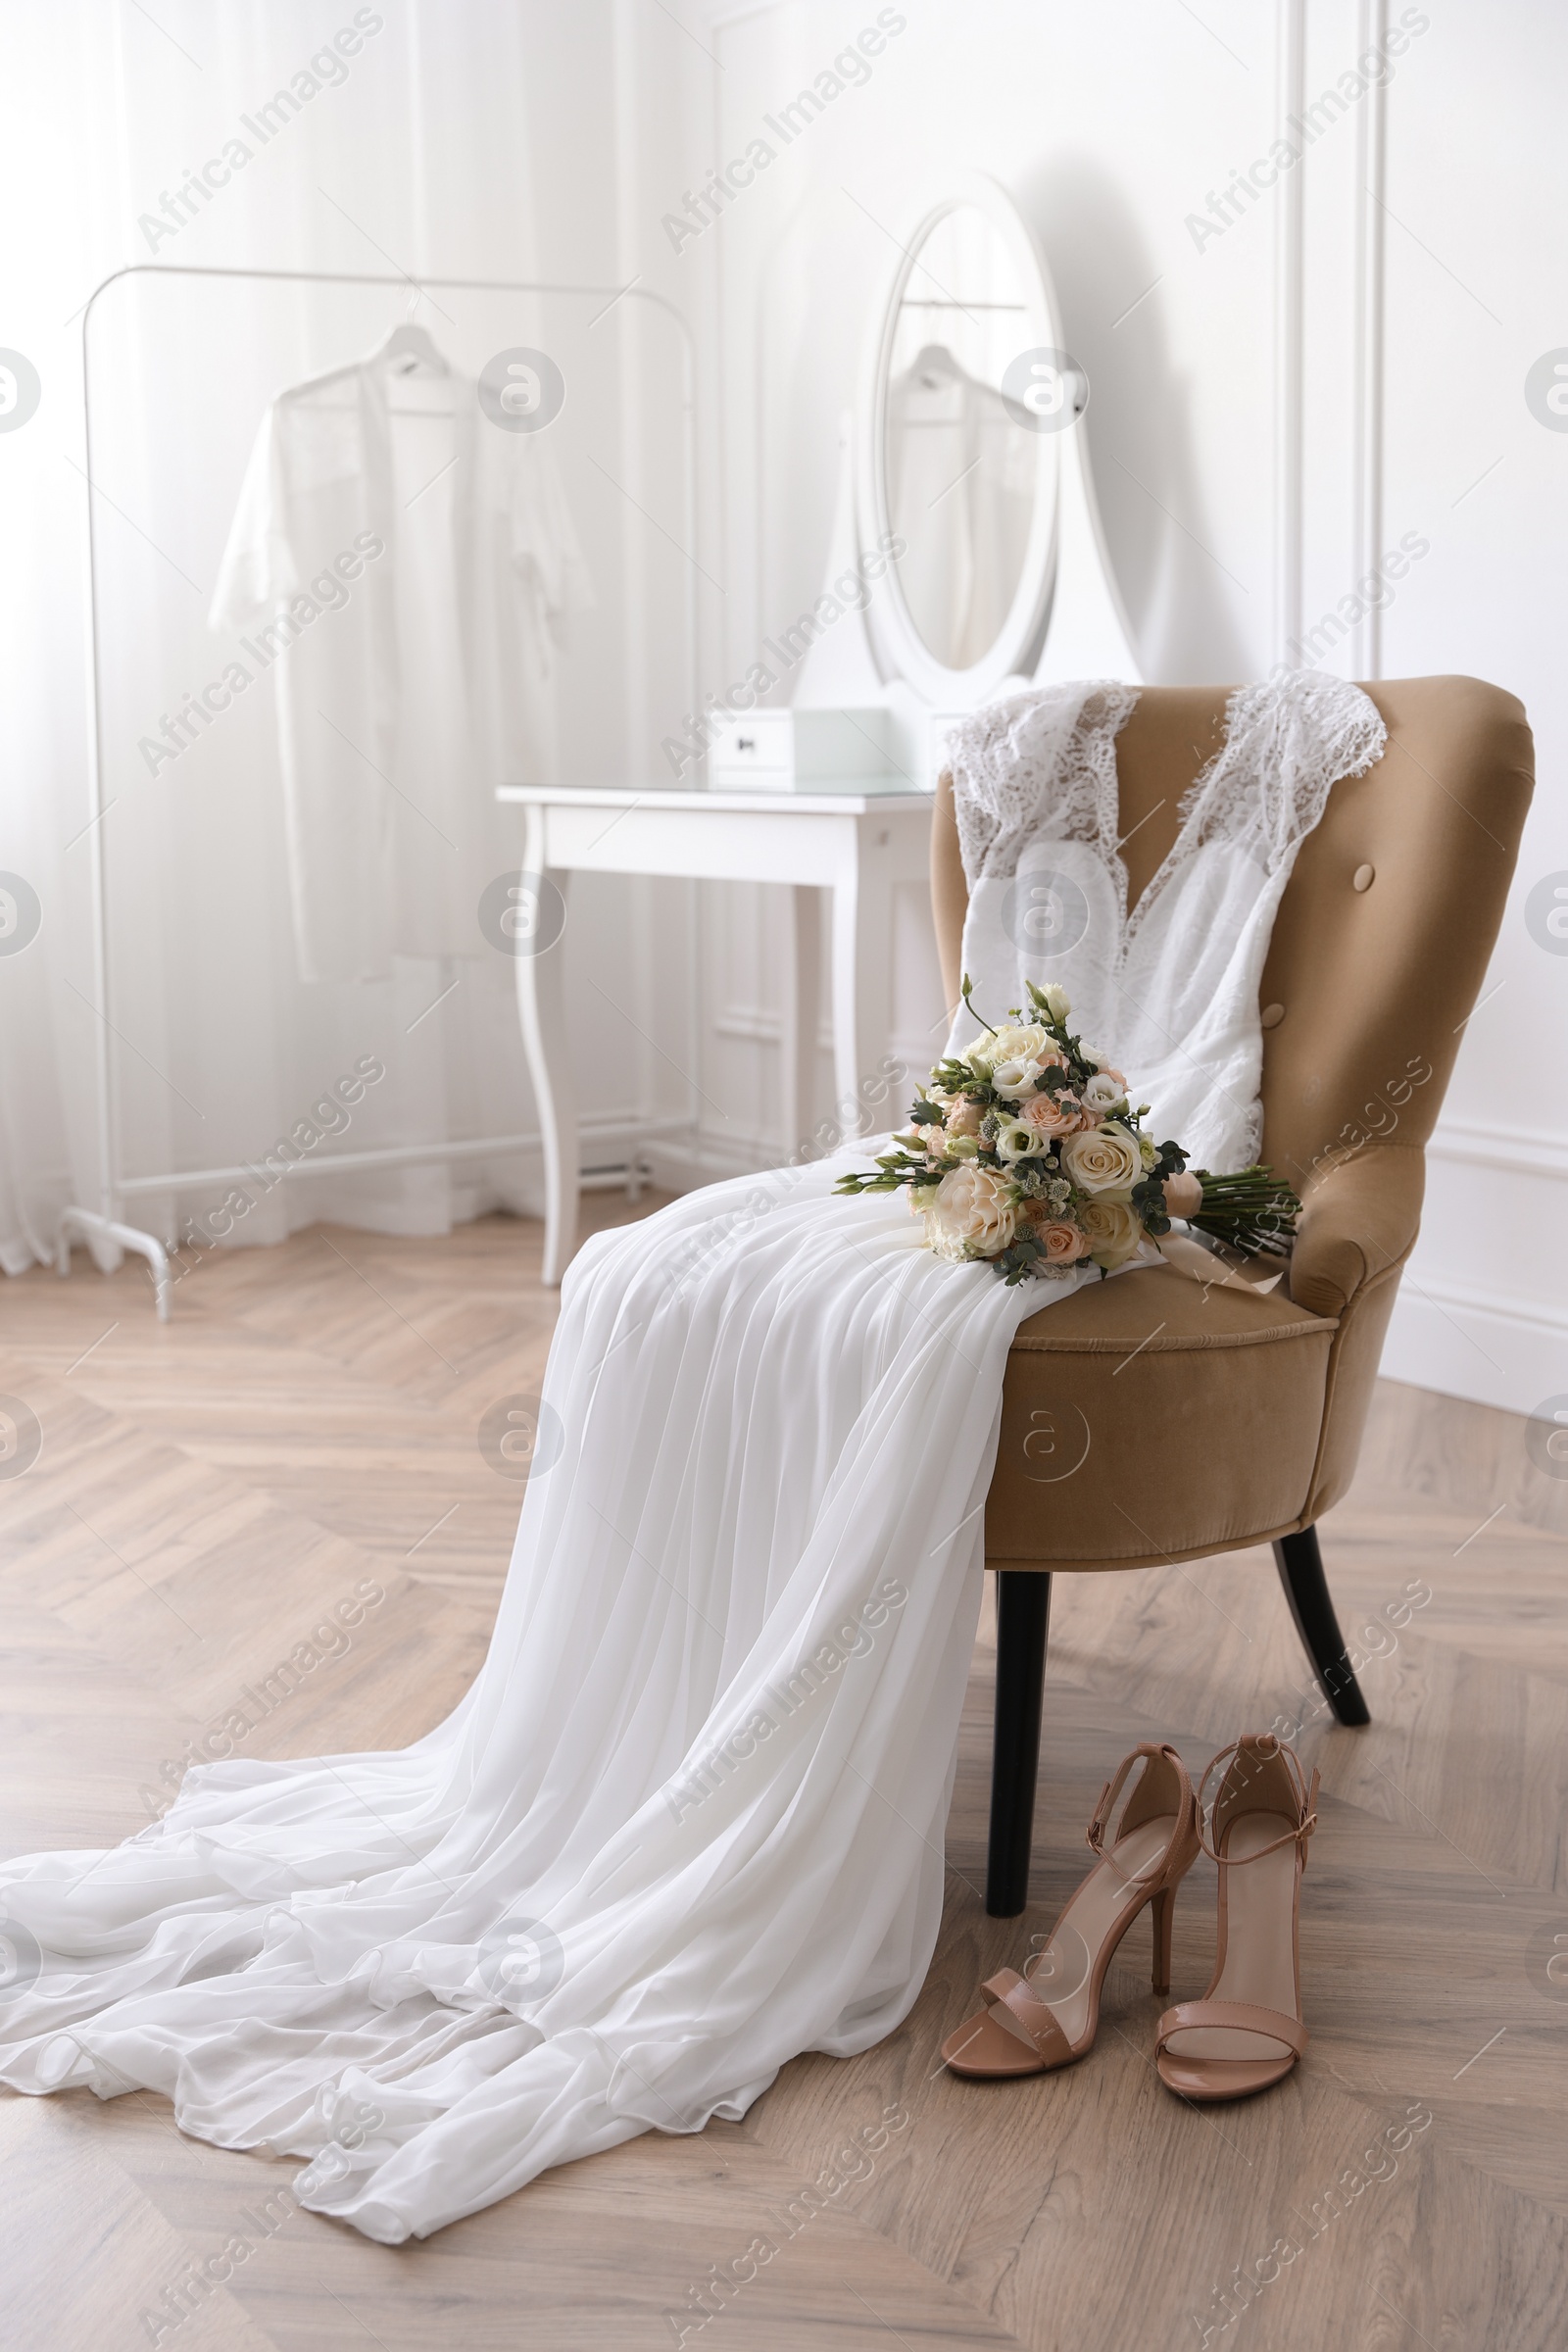 Photo of Elegant wedding dress, shoes and bouquet in room